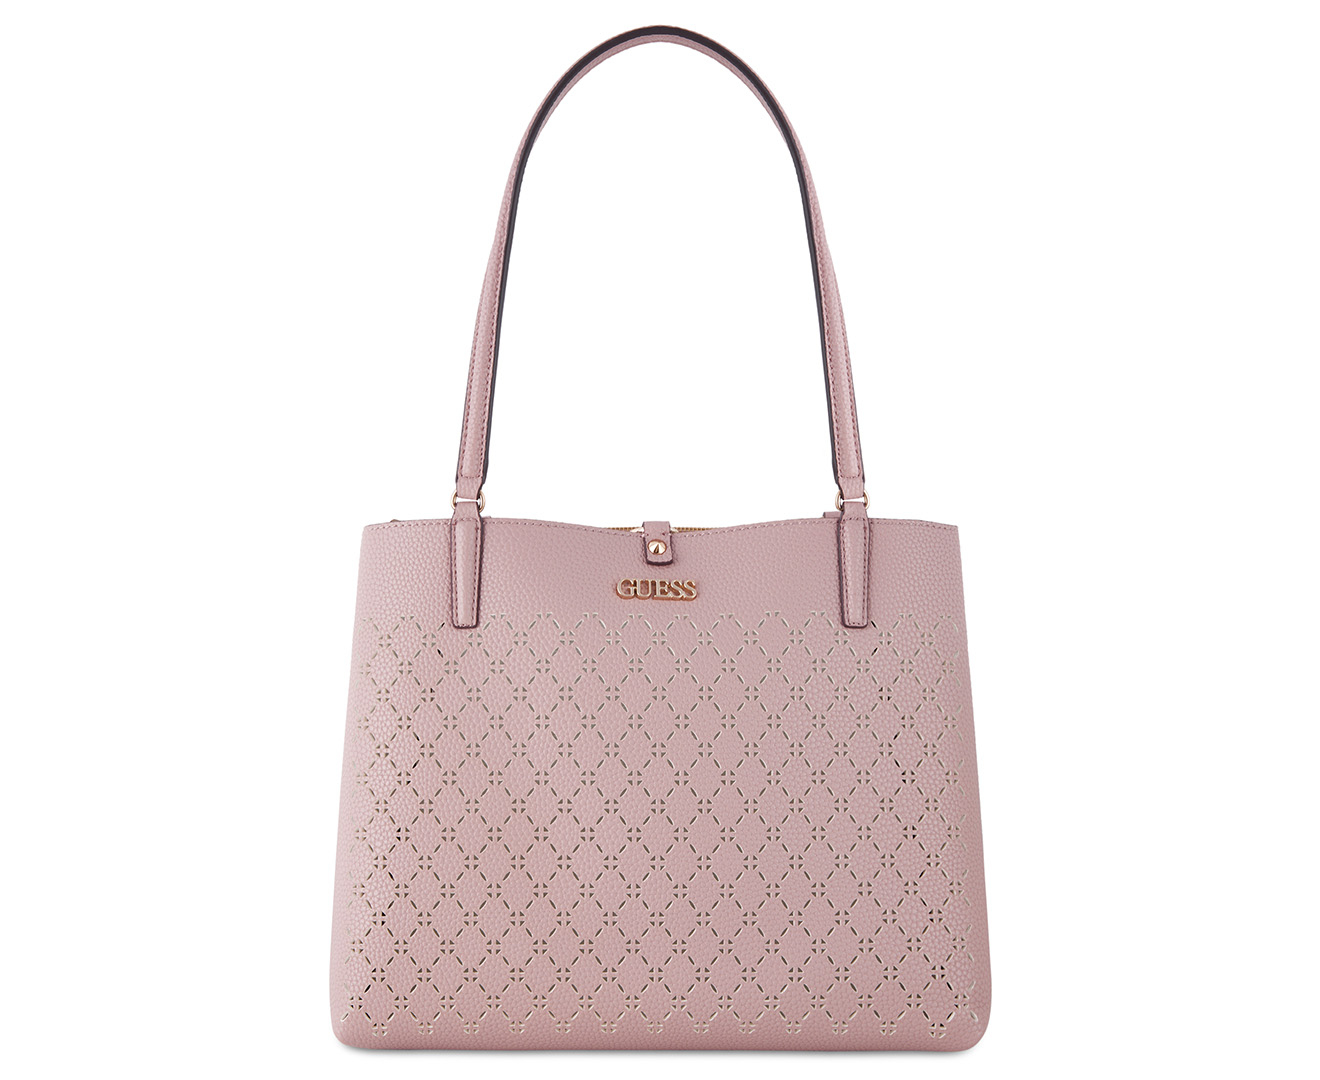 GUESS Amara Society Carryall Bag - Biscuit | Catch.co.nz